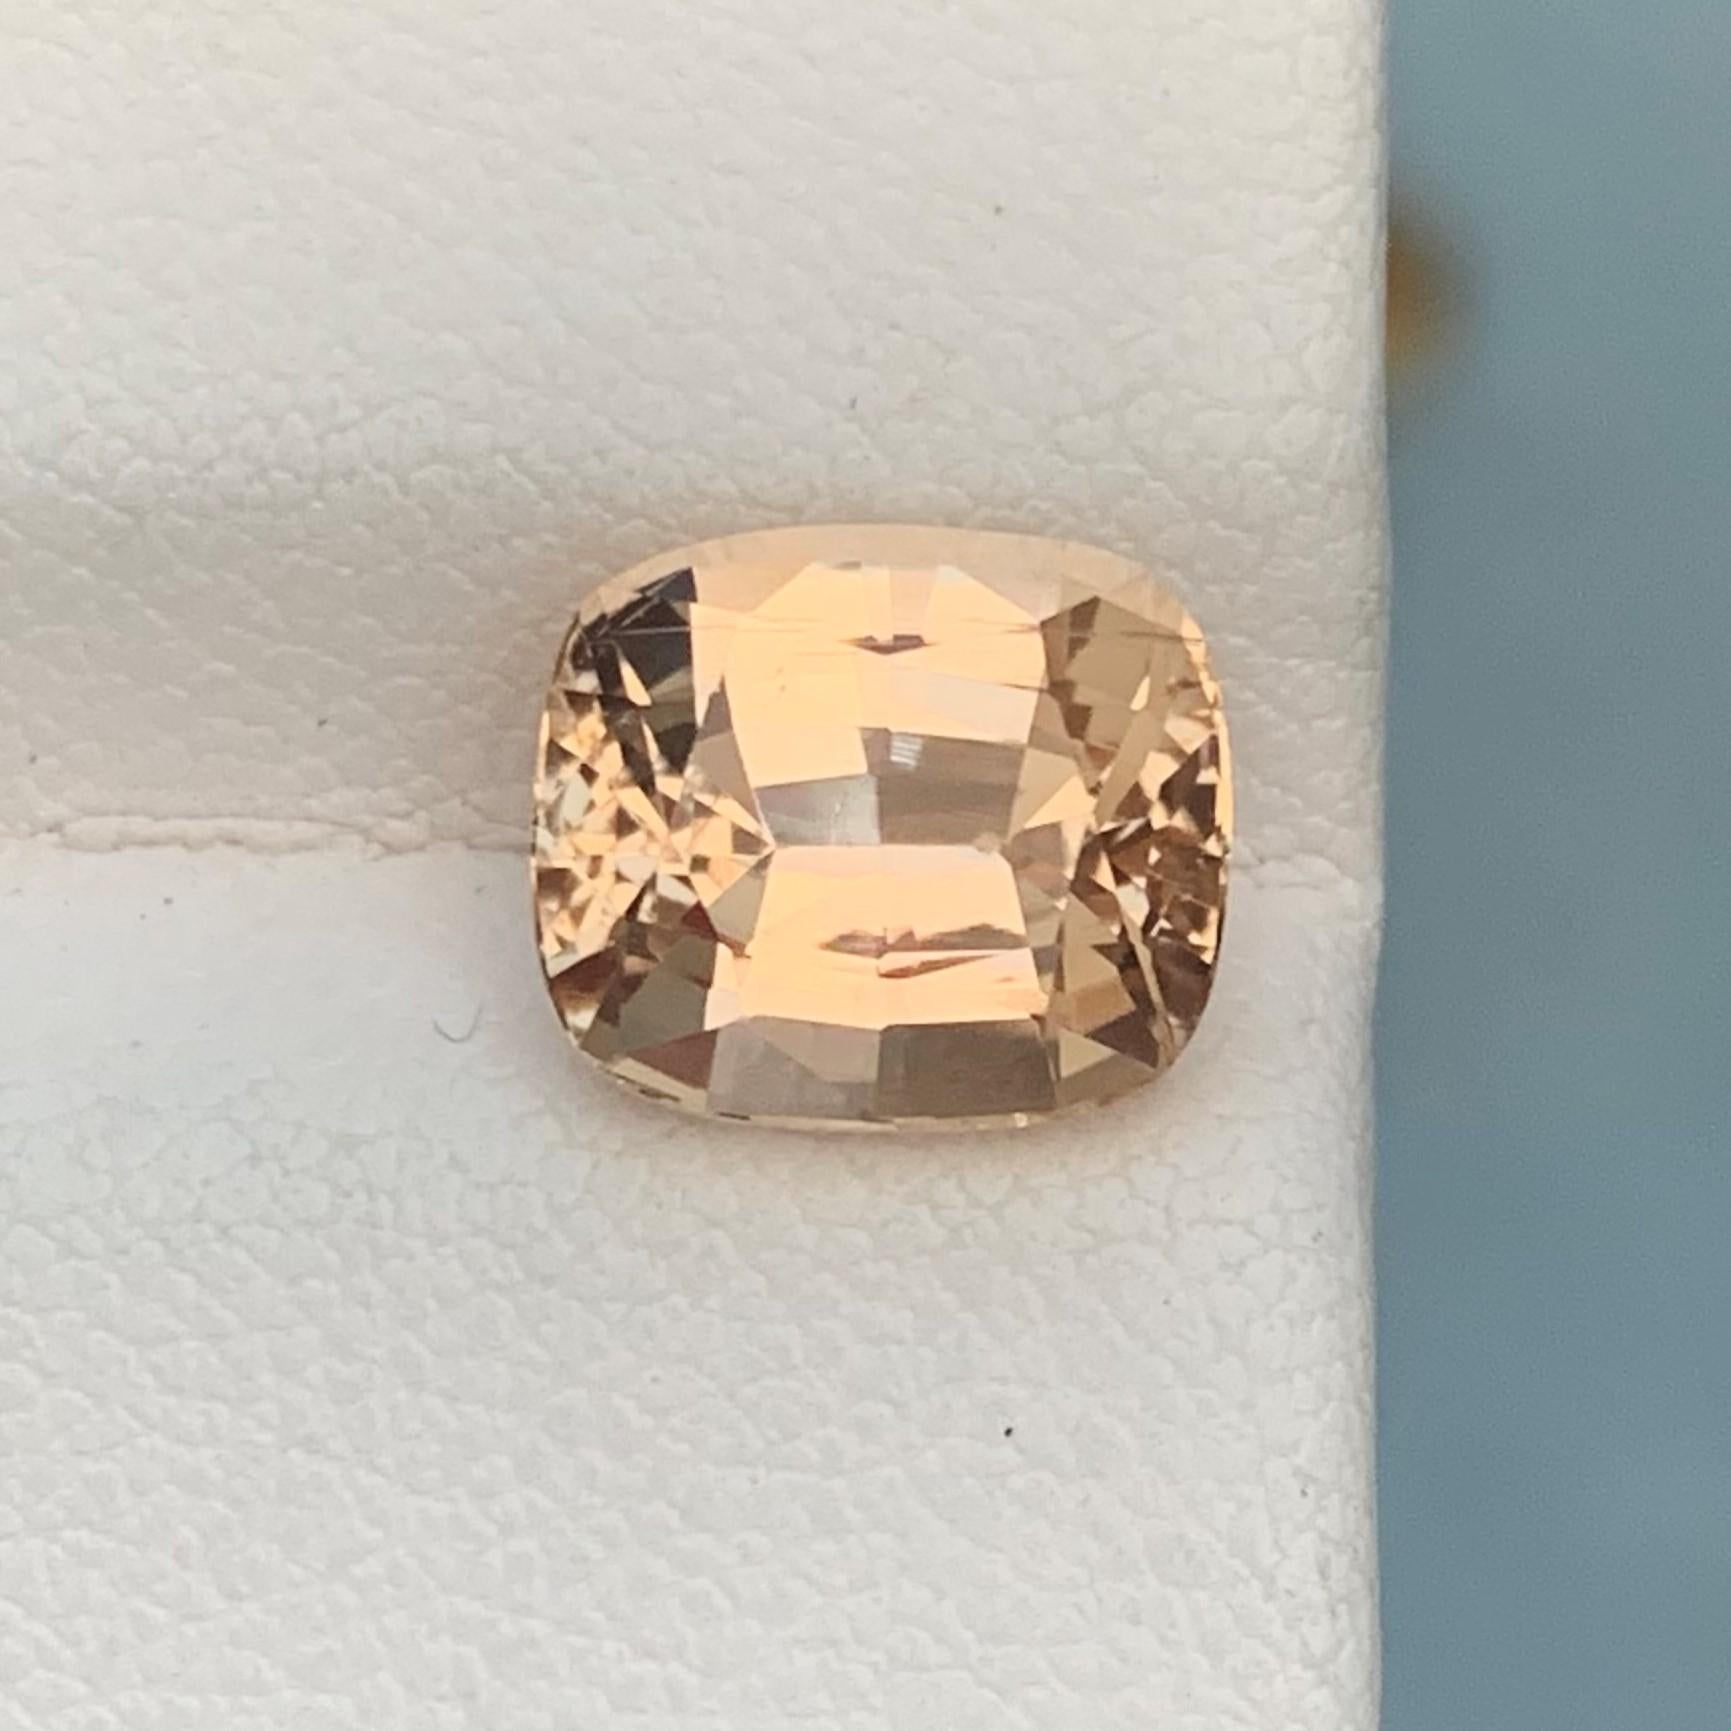 Faceted Imperial Topaz
Weight: 4.0 Carats
Dimension: 9.8x8.5x6 Mm
Origin: Katlang Pakistan
Shape: Cushion
Color; Peach Imperial
Treatment: Non
Certificate: Available
Imperial Topaz encourages healthy boundaries and helps us be attracted to the